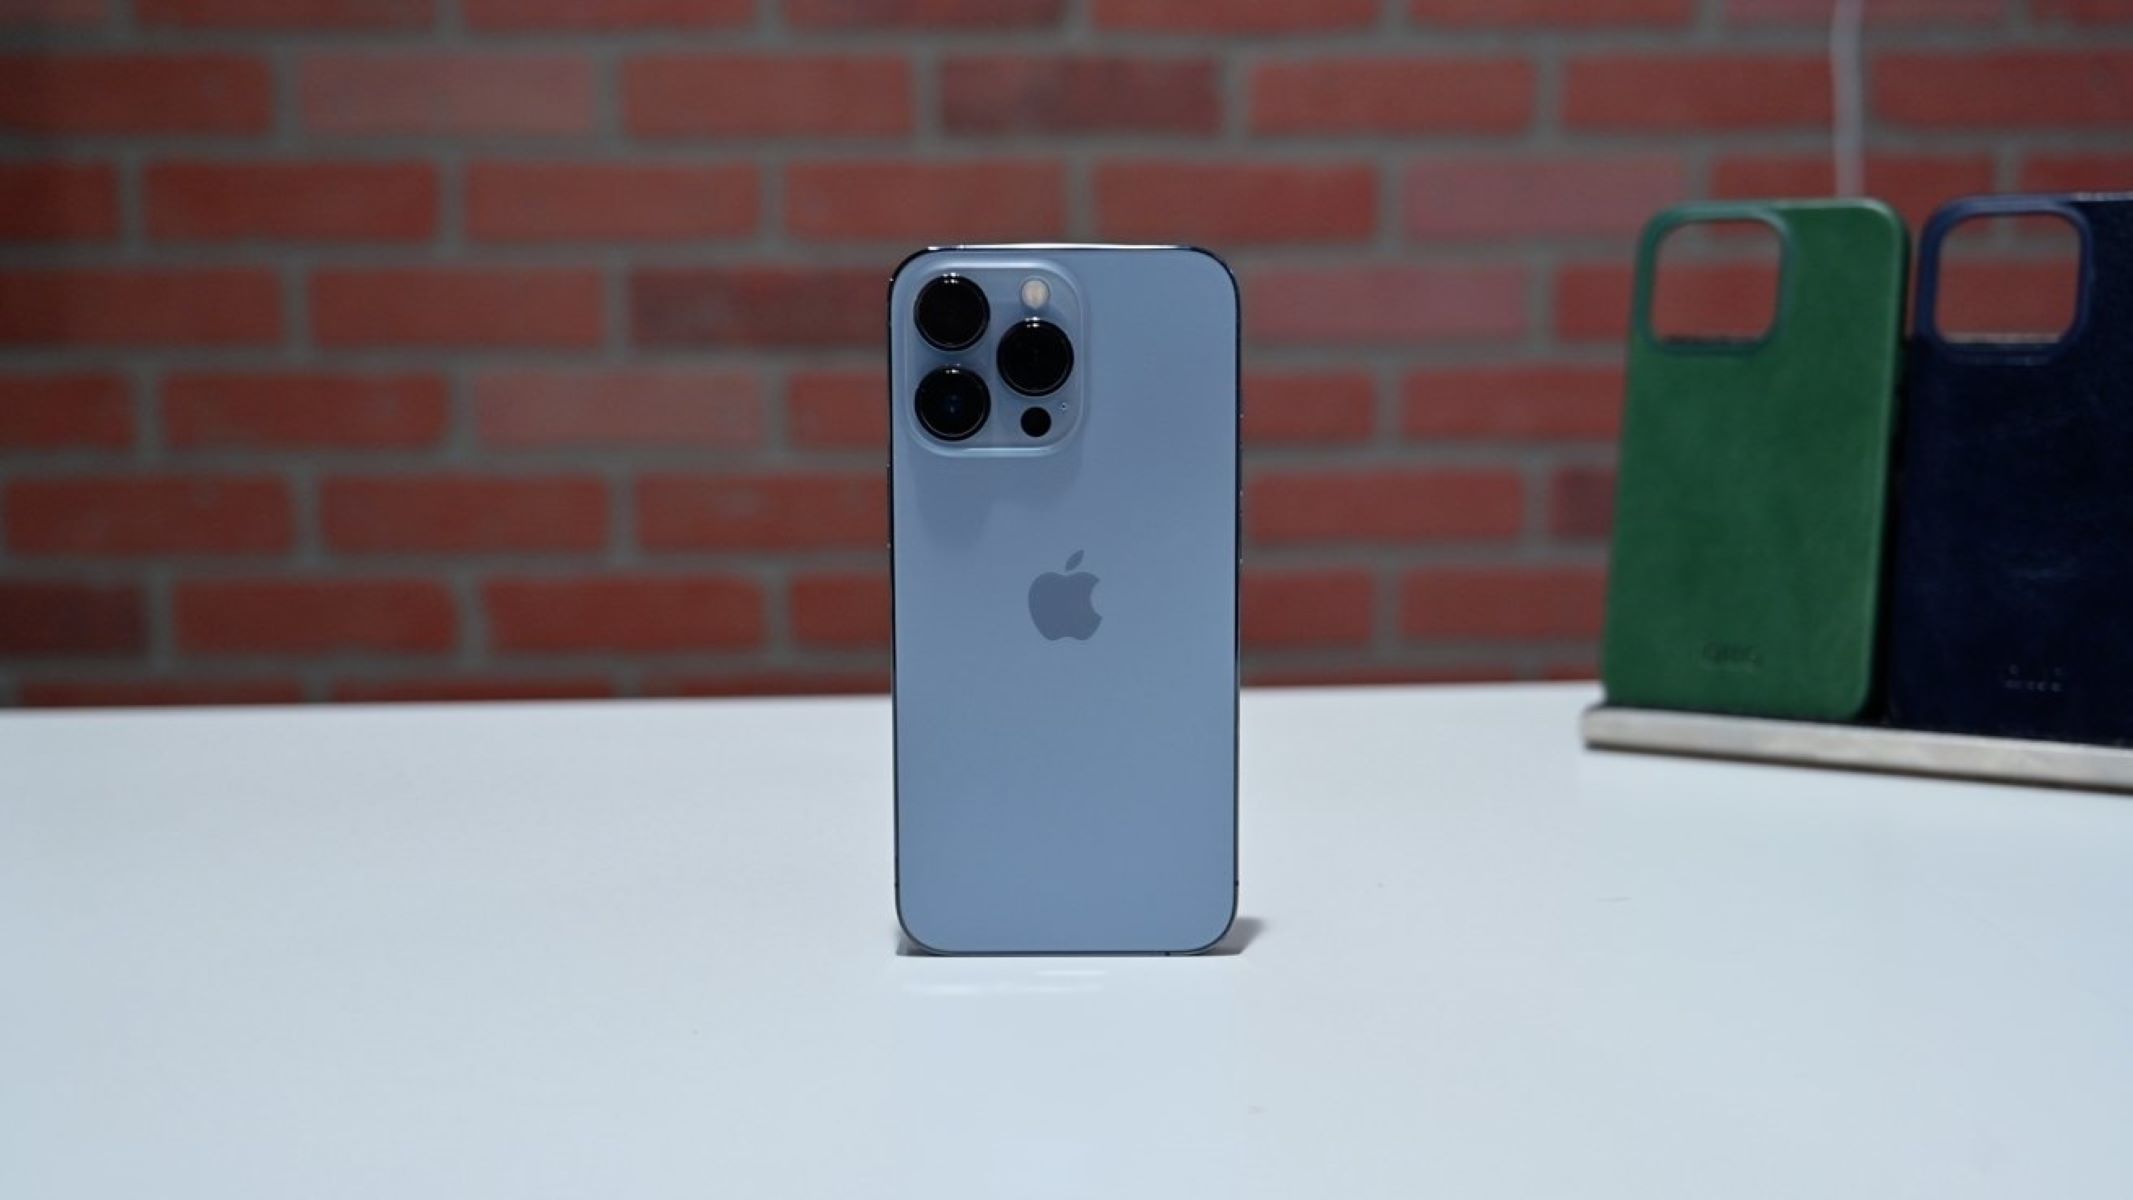 Pro Model Overview: Understanding Features Of The IPhone 13 Pro